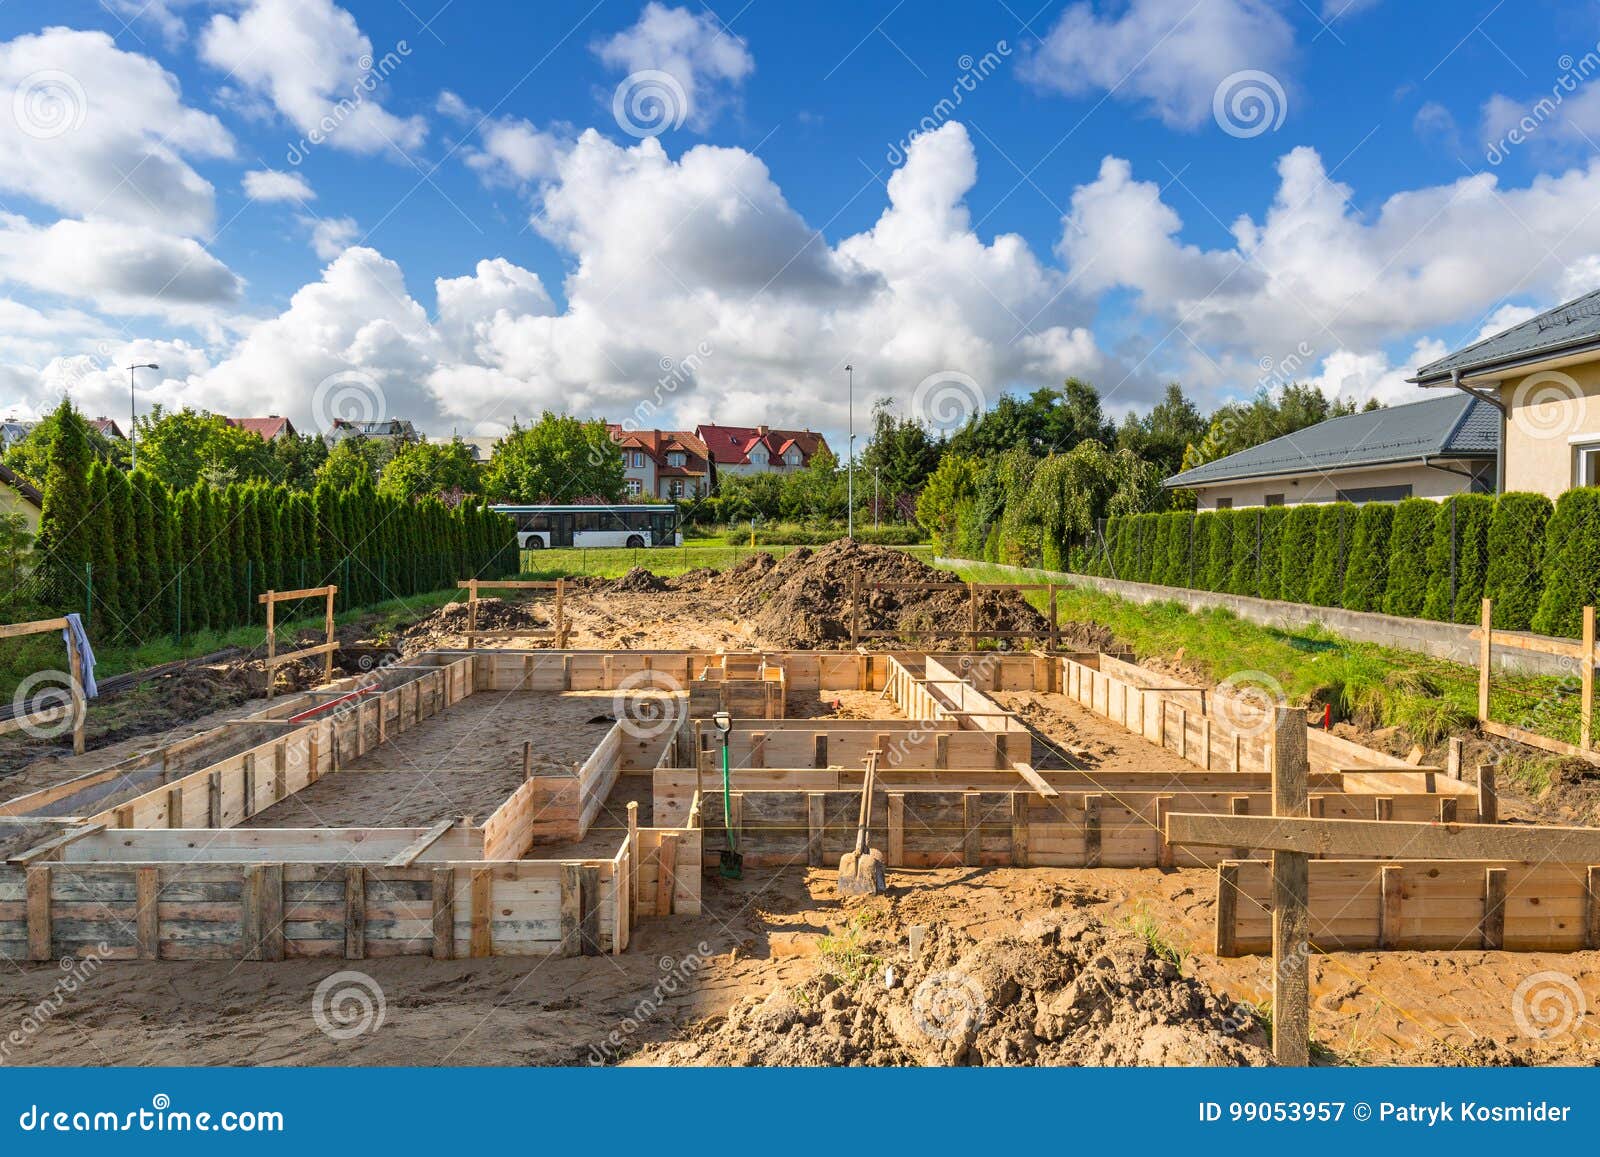 Clapboards For Concrete Foundation Stock Image - Image of estate